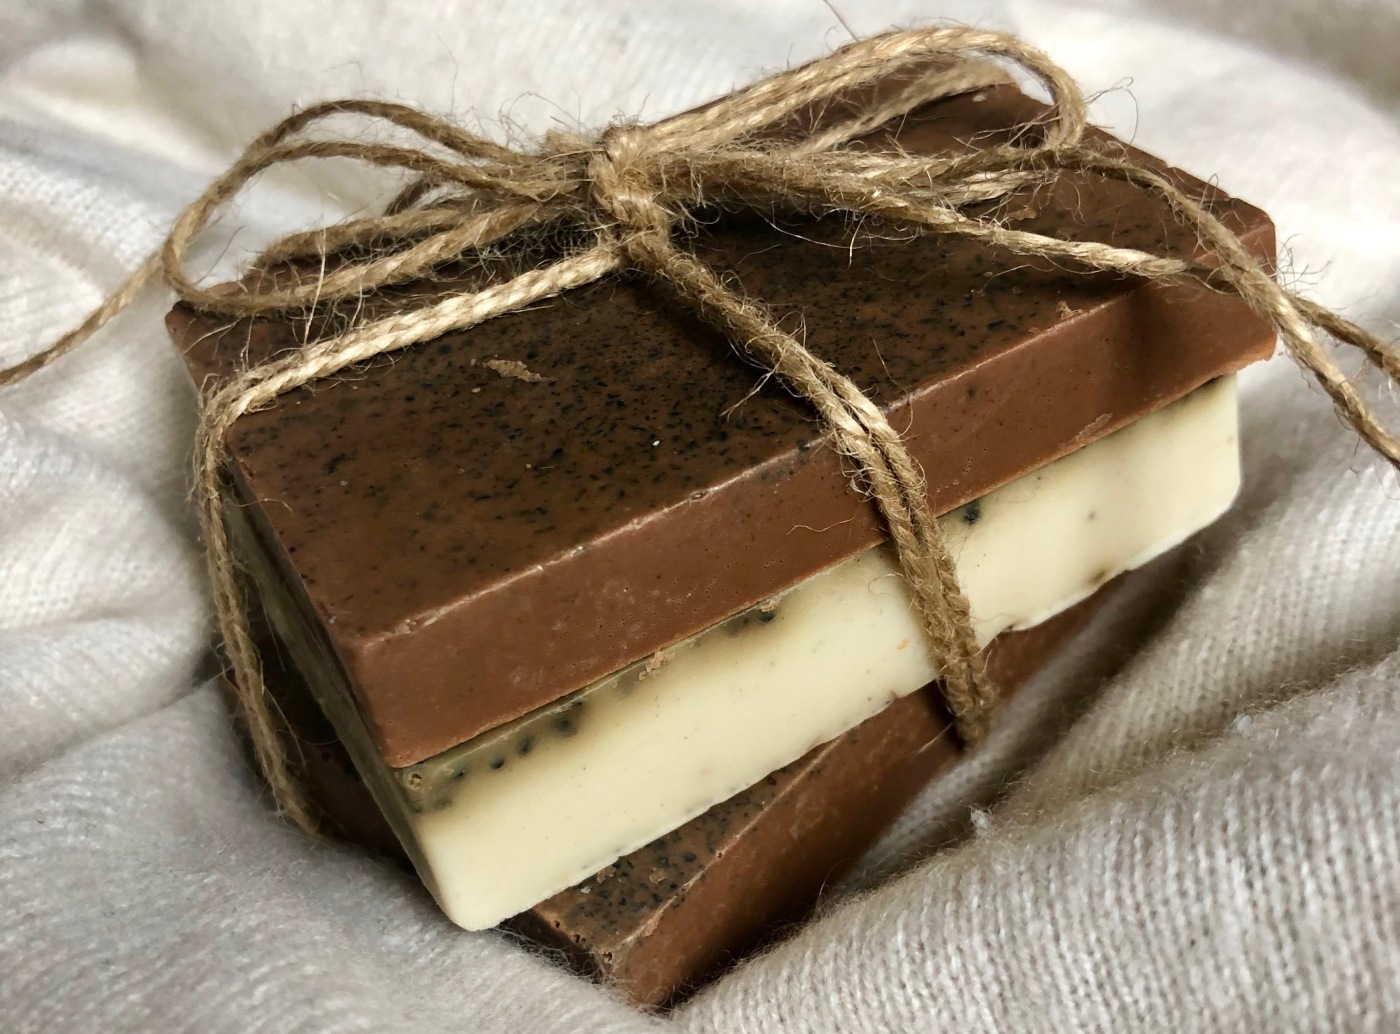 Easy Coffee Soap Recipe: Melt and Pour Soap for Beginners